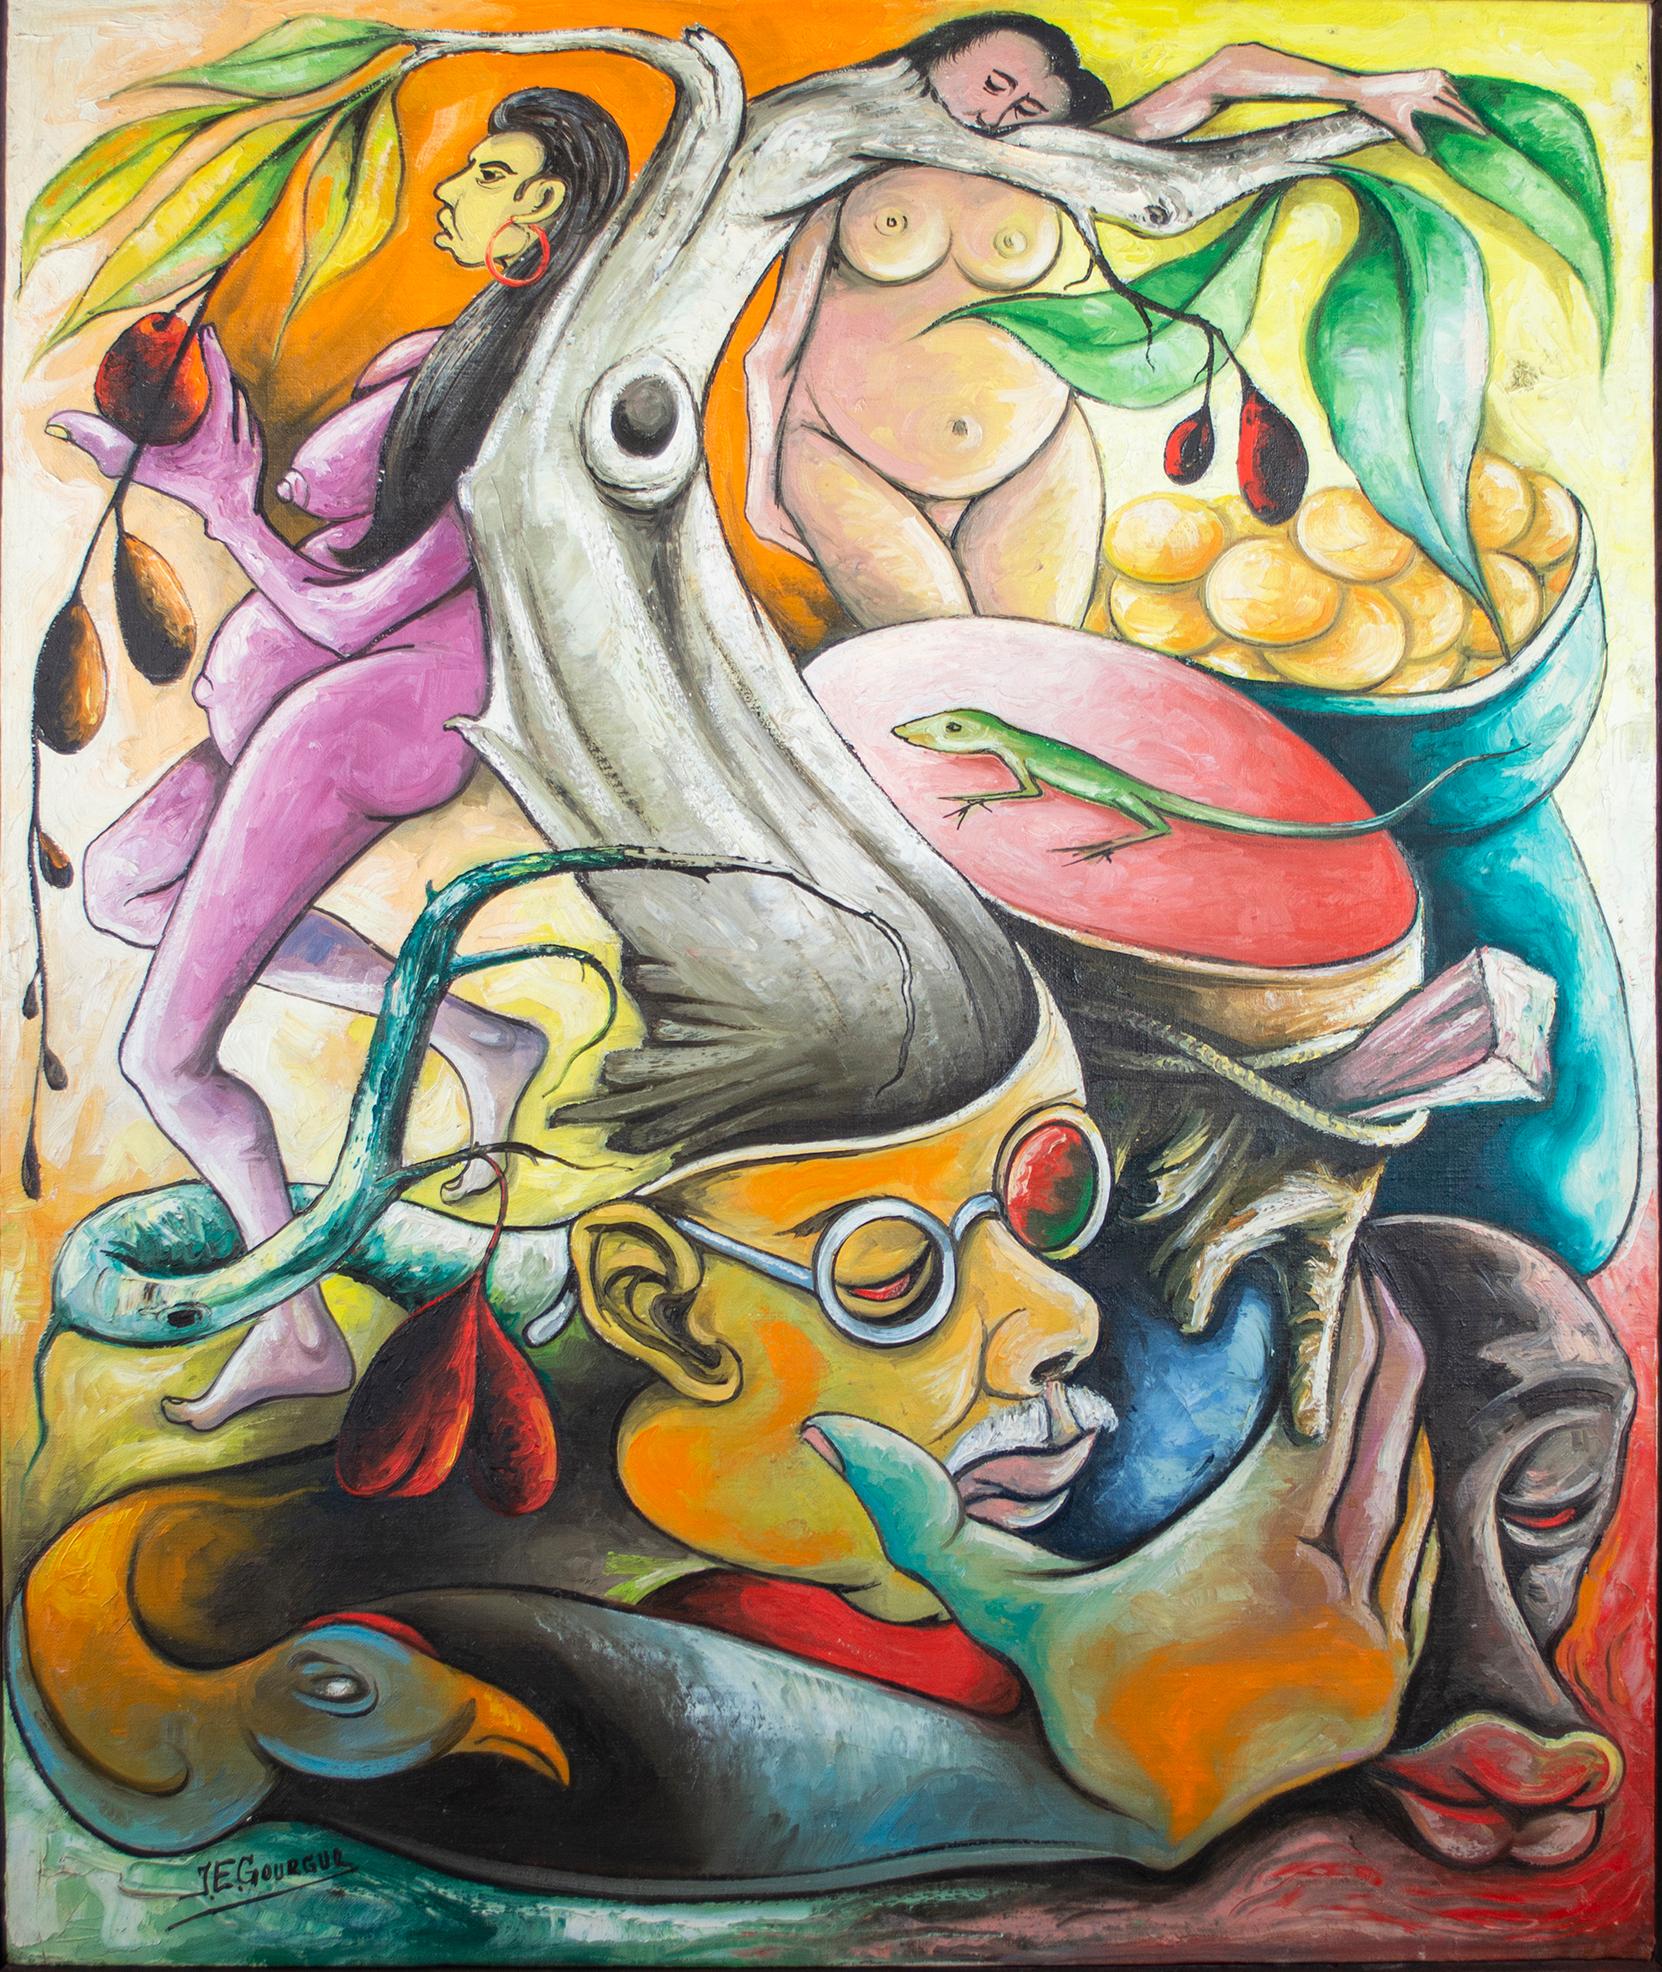 "Clanman" is an oil on canvas signed by Jacques-Enguerrand Gourgue. This Haitian piece is surreal and complex. A man with glasses has a tree growing out of his brain. Two nude woman rest against this tree, the purple woman eats the fruit. Many